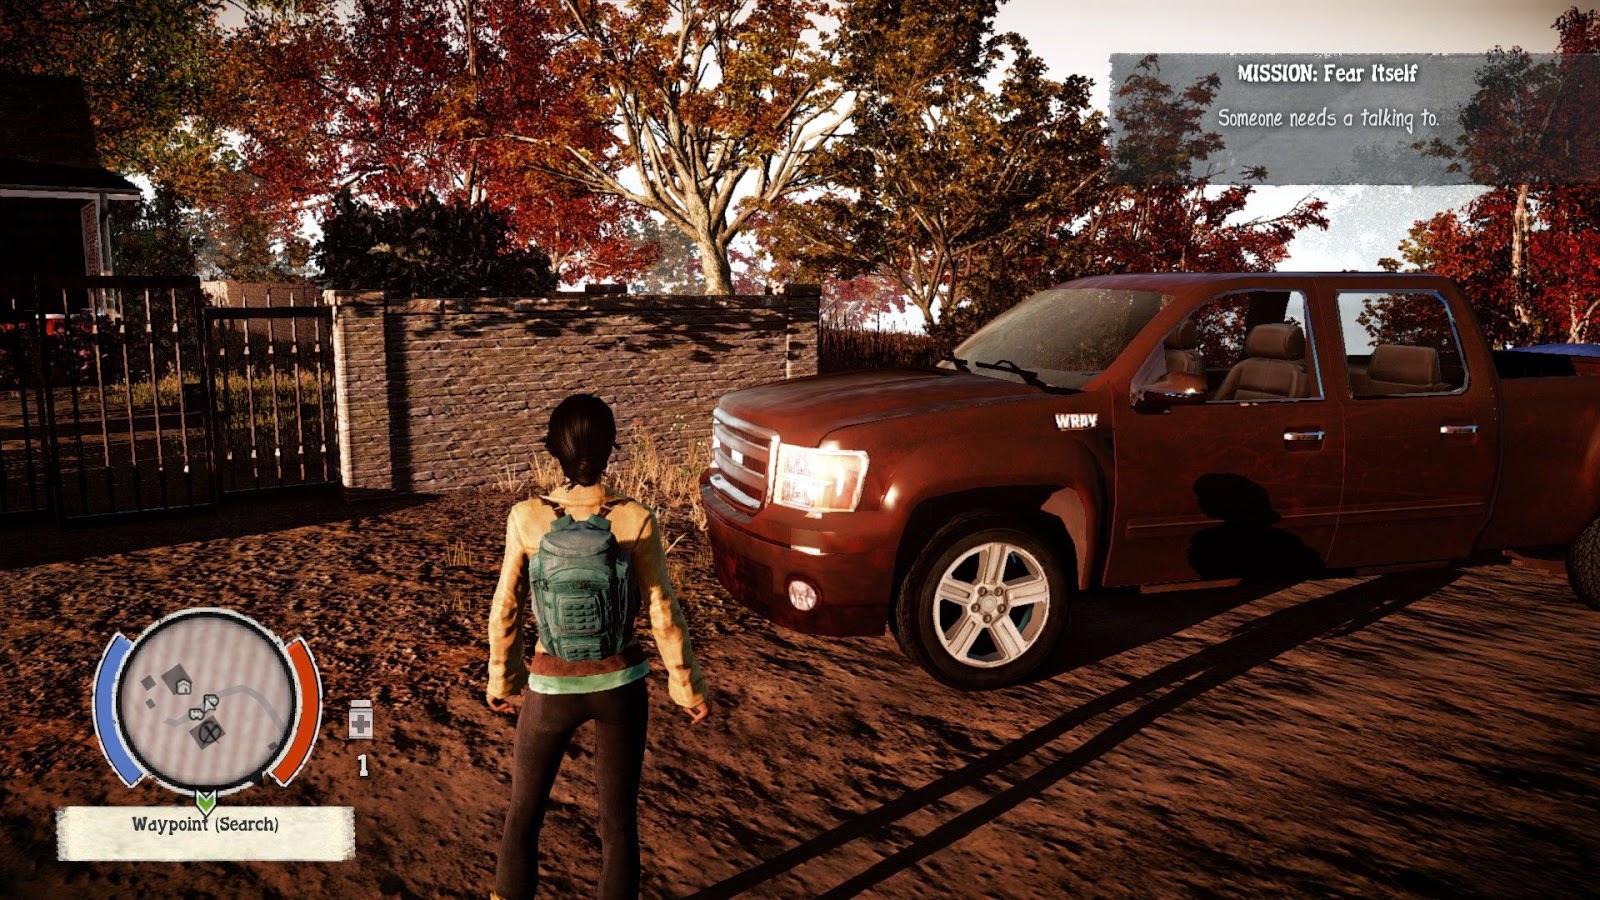 State of decay 2 release date